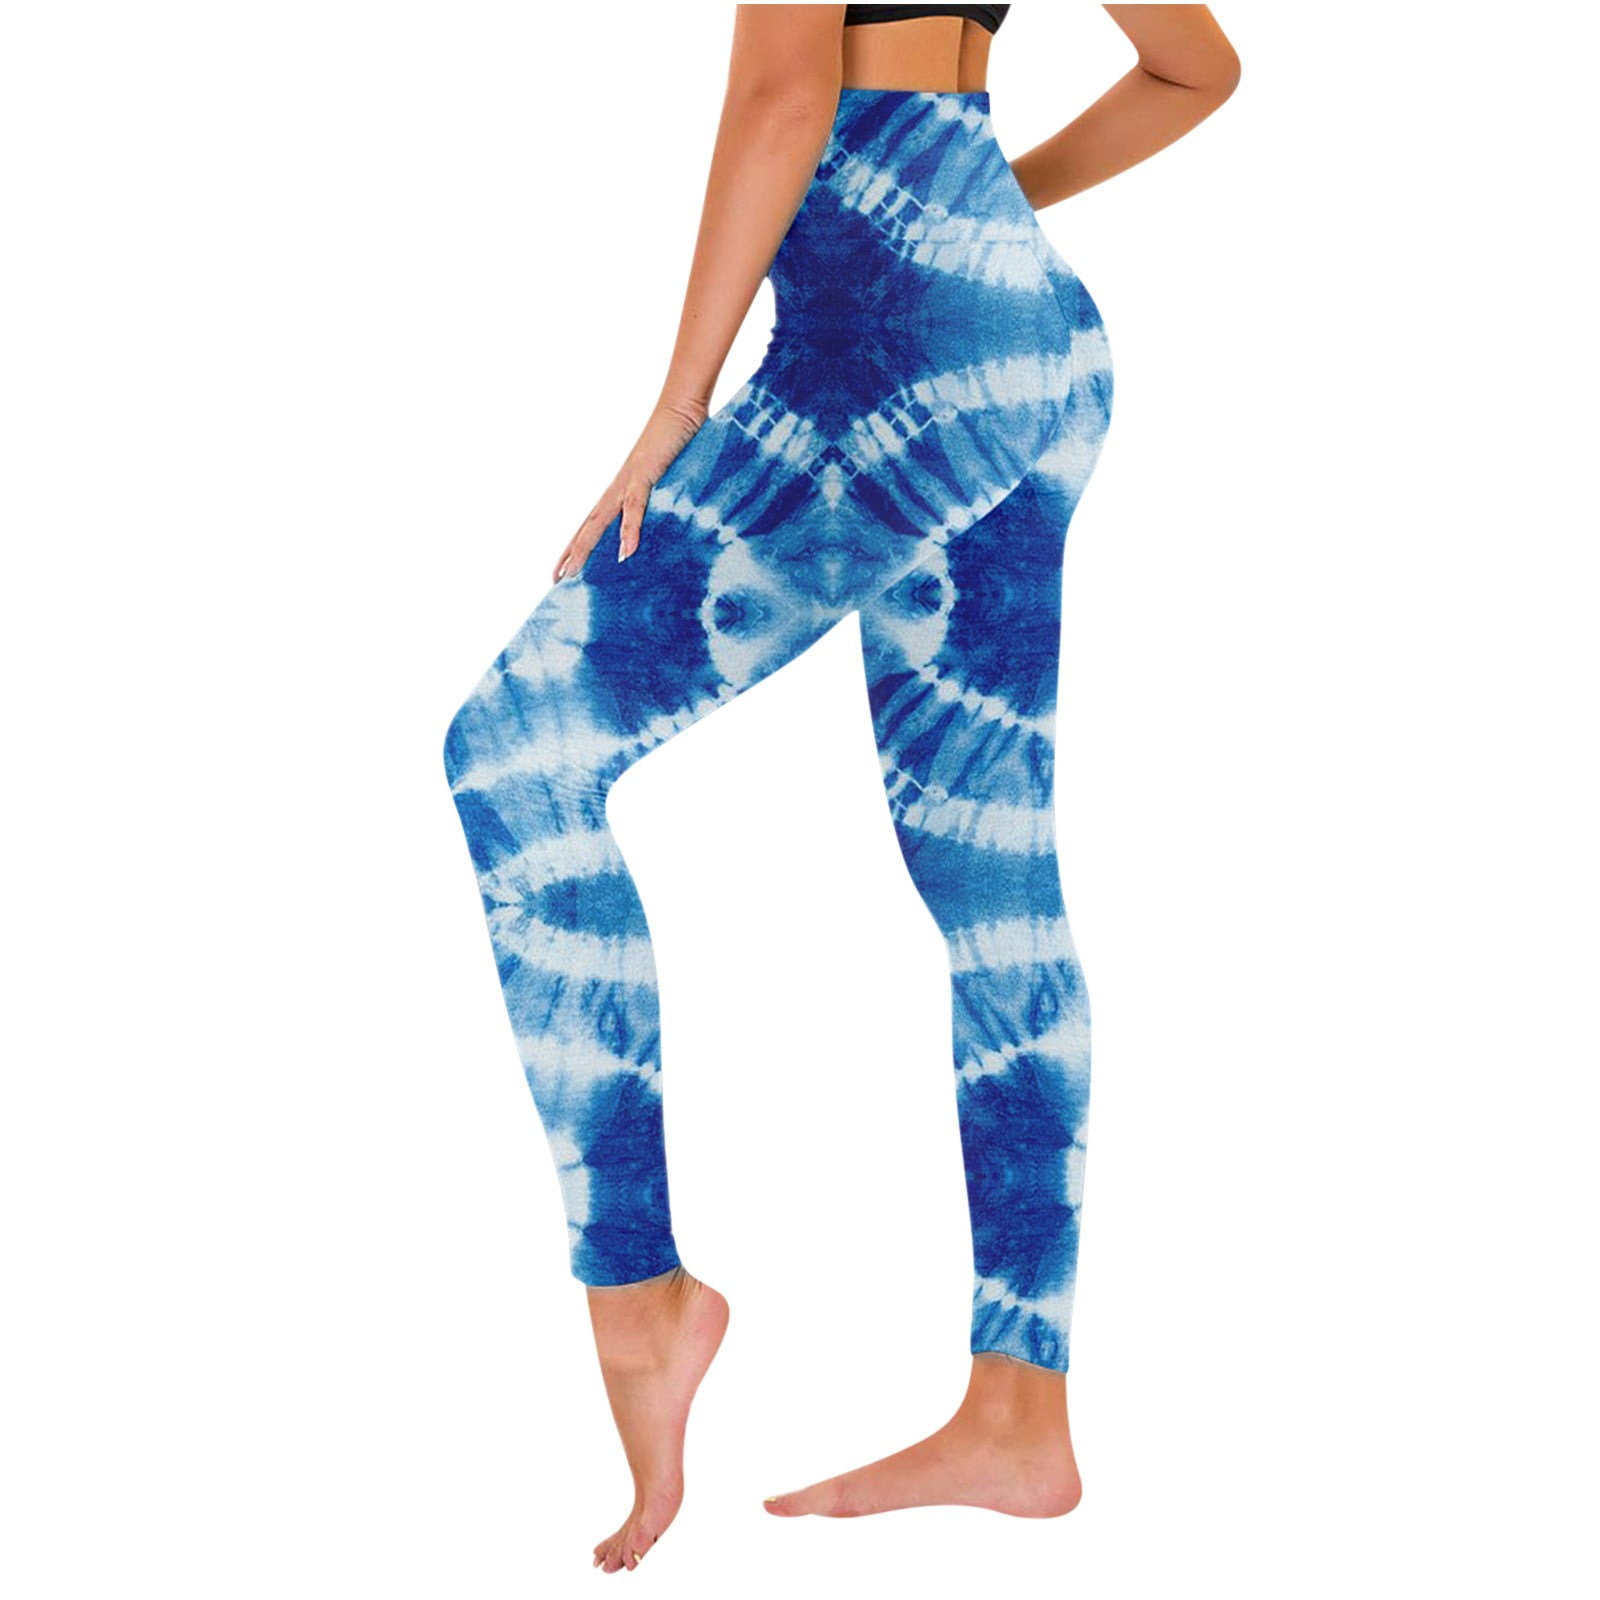 High Waist Yoga Pants Seamless Tie Dye Sports Leggings Tummy Control Workout  Running Yoga Leggings Comfortable Shapewear Keeps You Hugged In And Looking  Slim Colors From Healthy521, $9.53